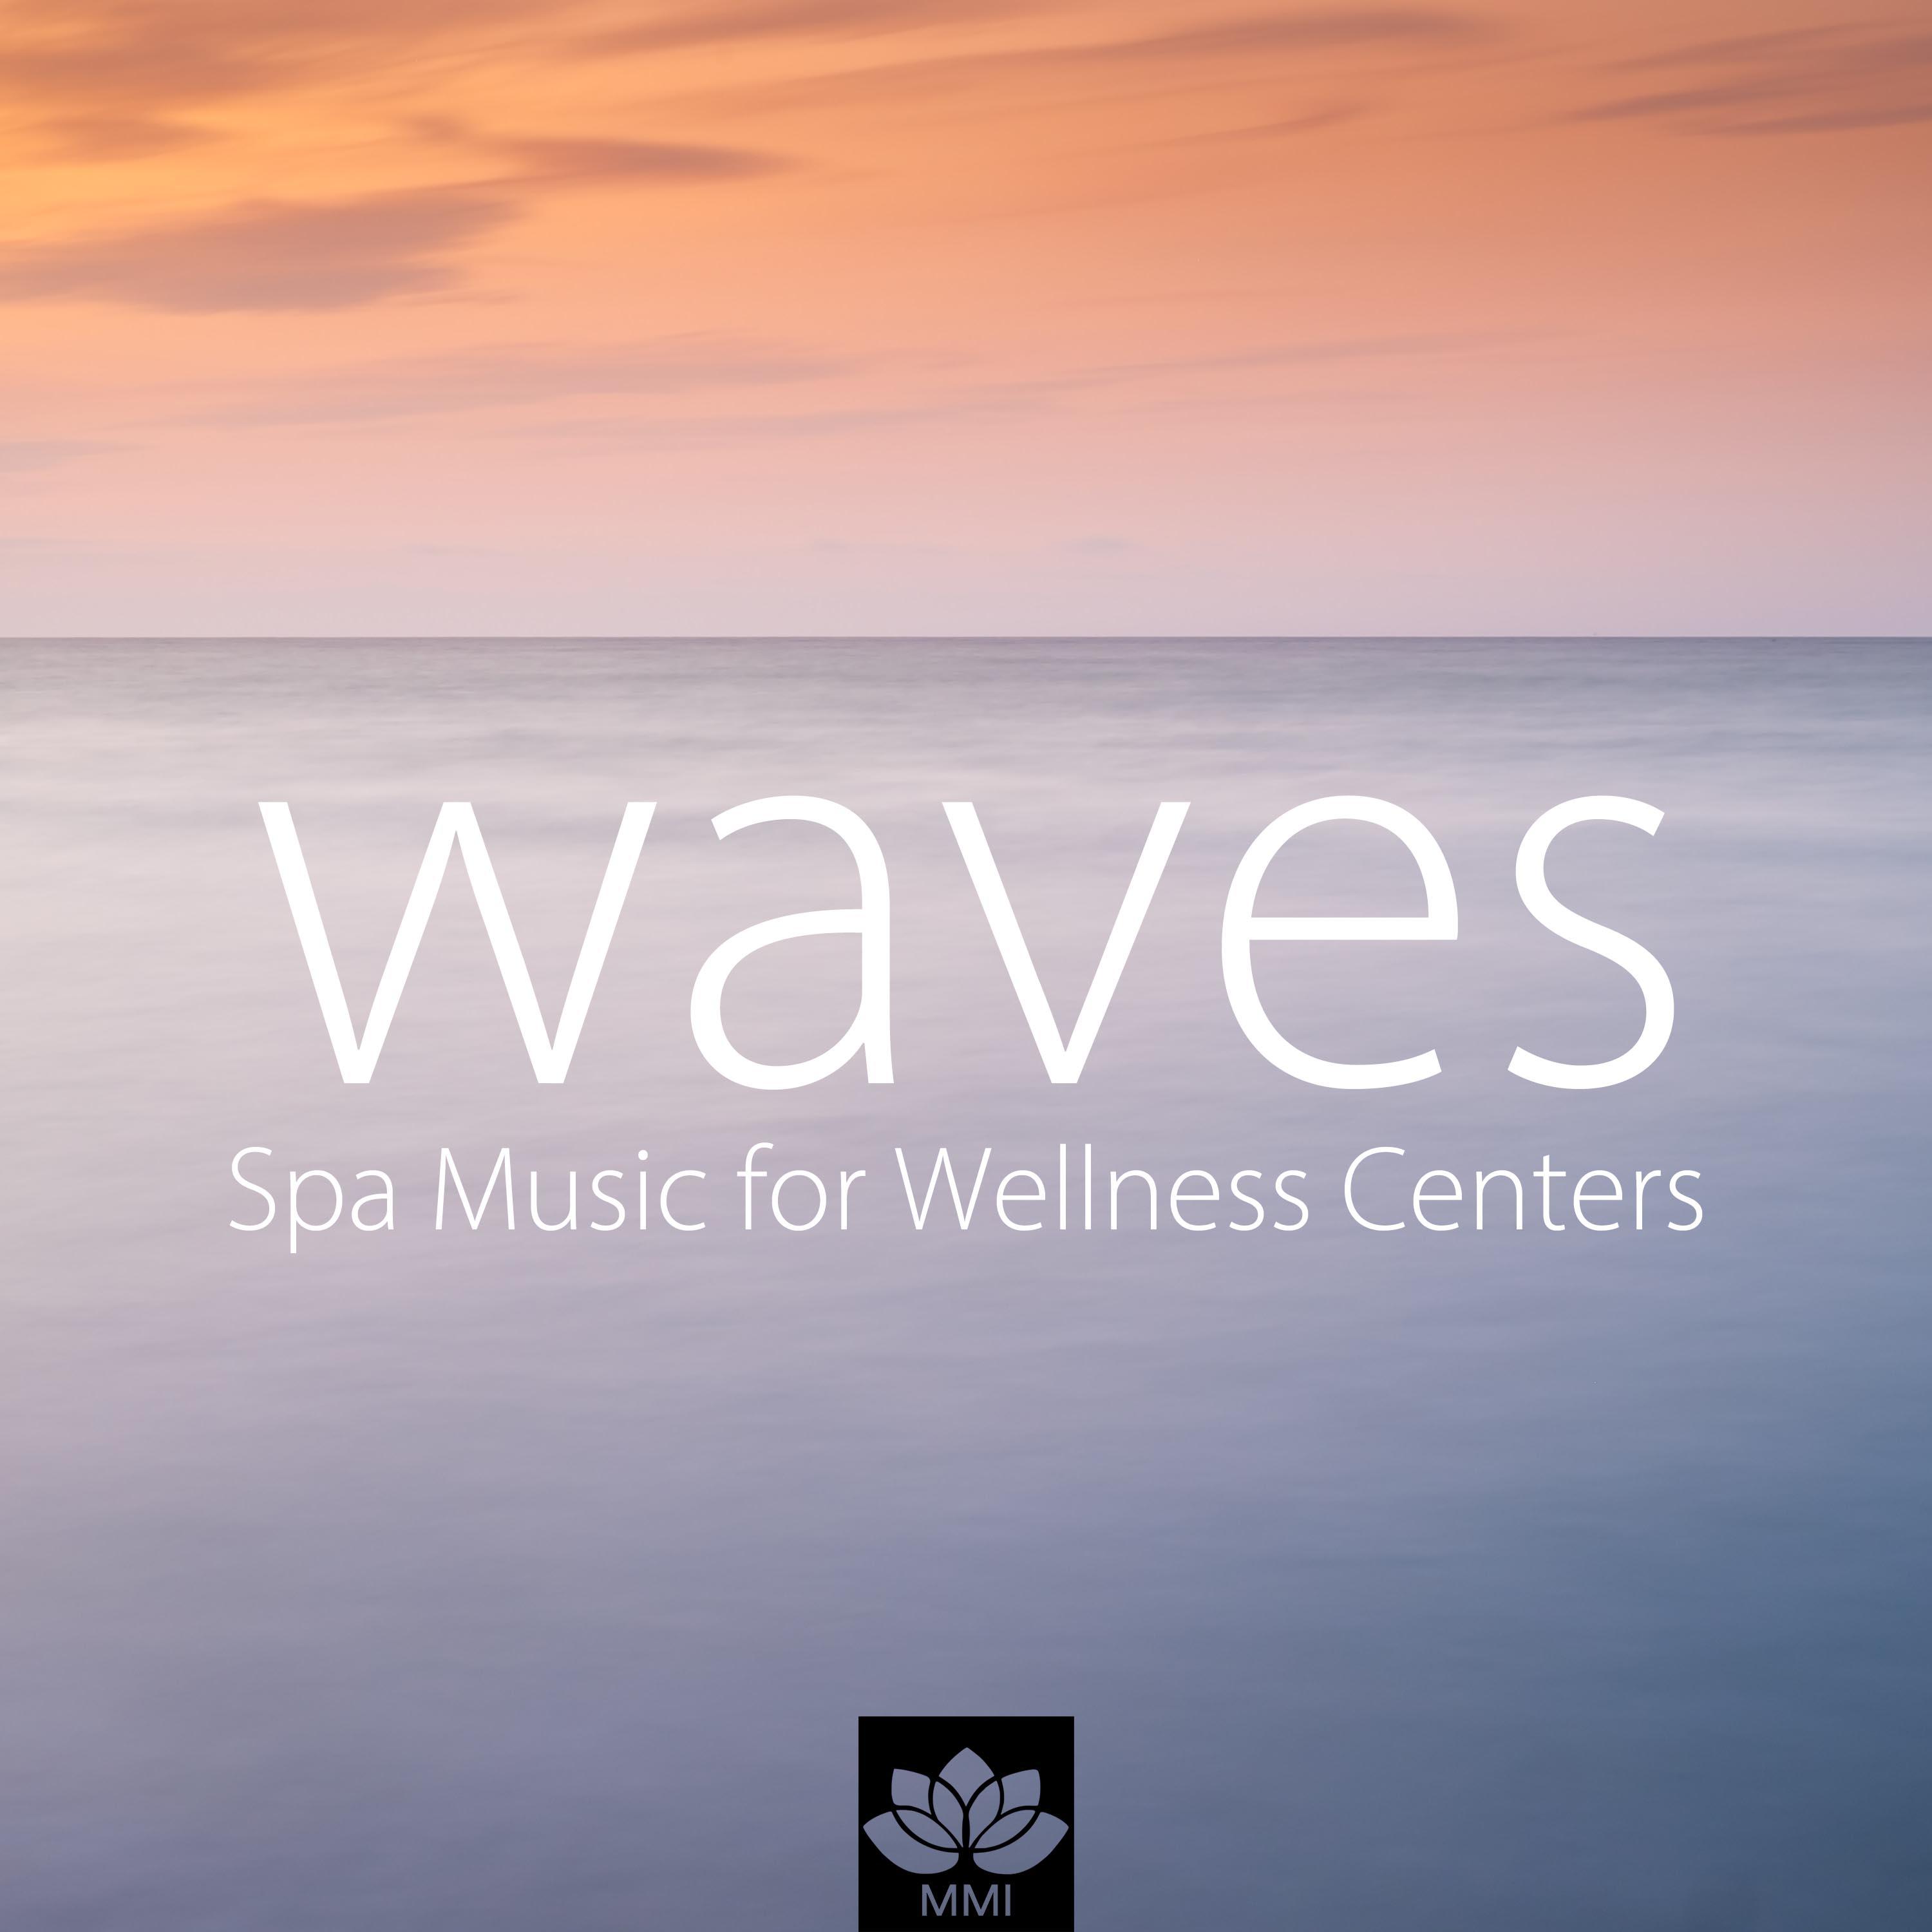 Waves - Spa Music for Wellness Centers, Yoga & Meditation Music for a Good Life, Inner Peace, Happiness and Positive Thinking